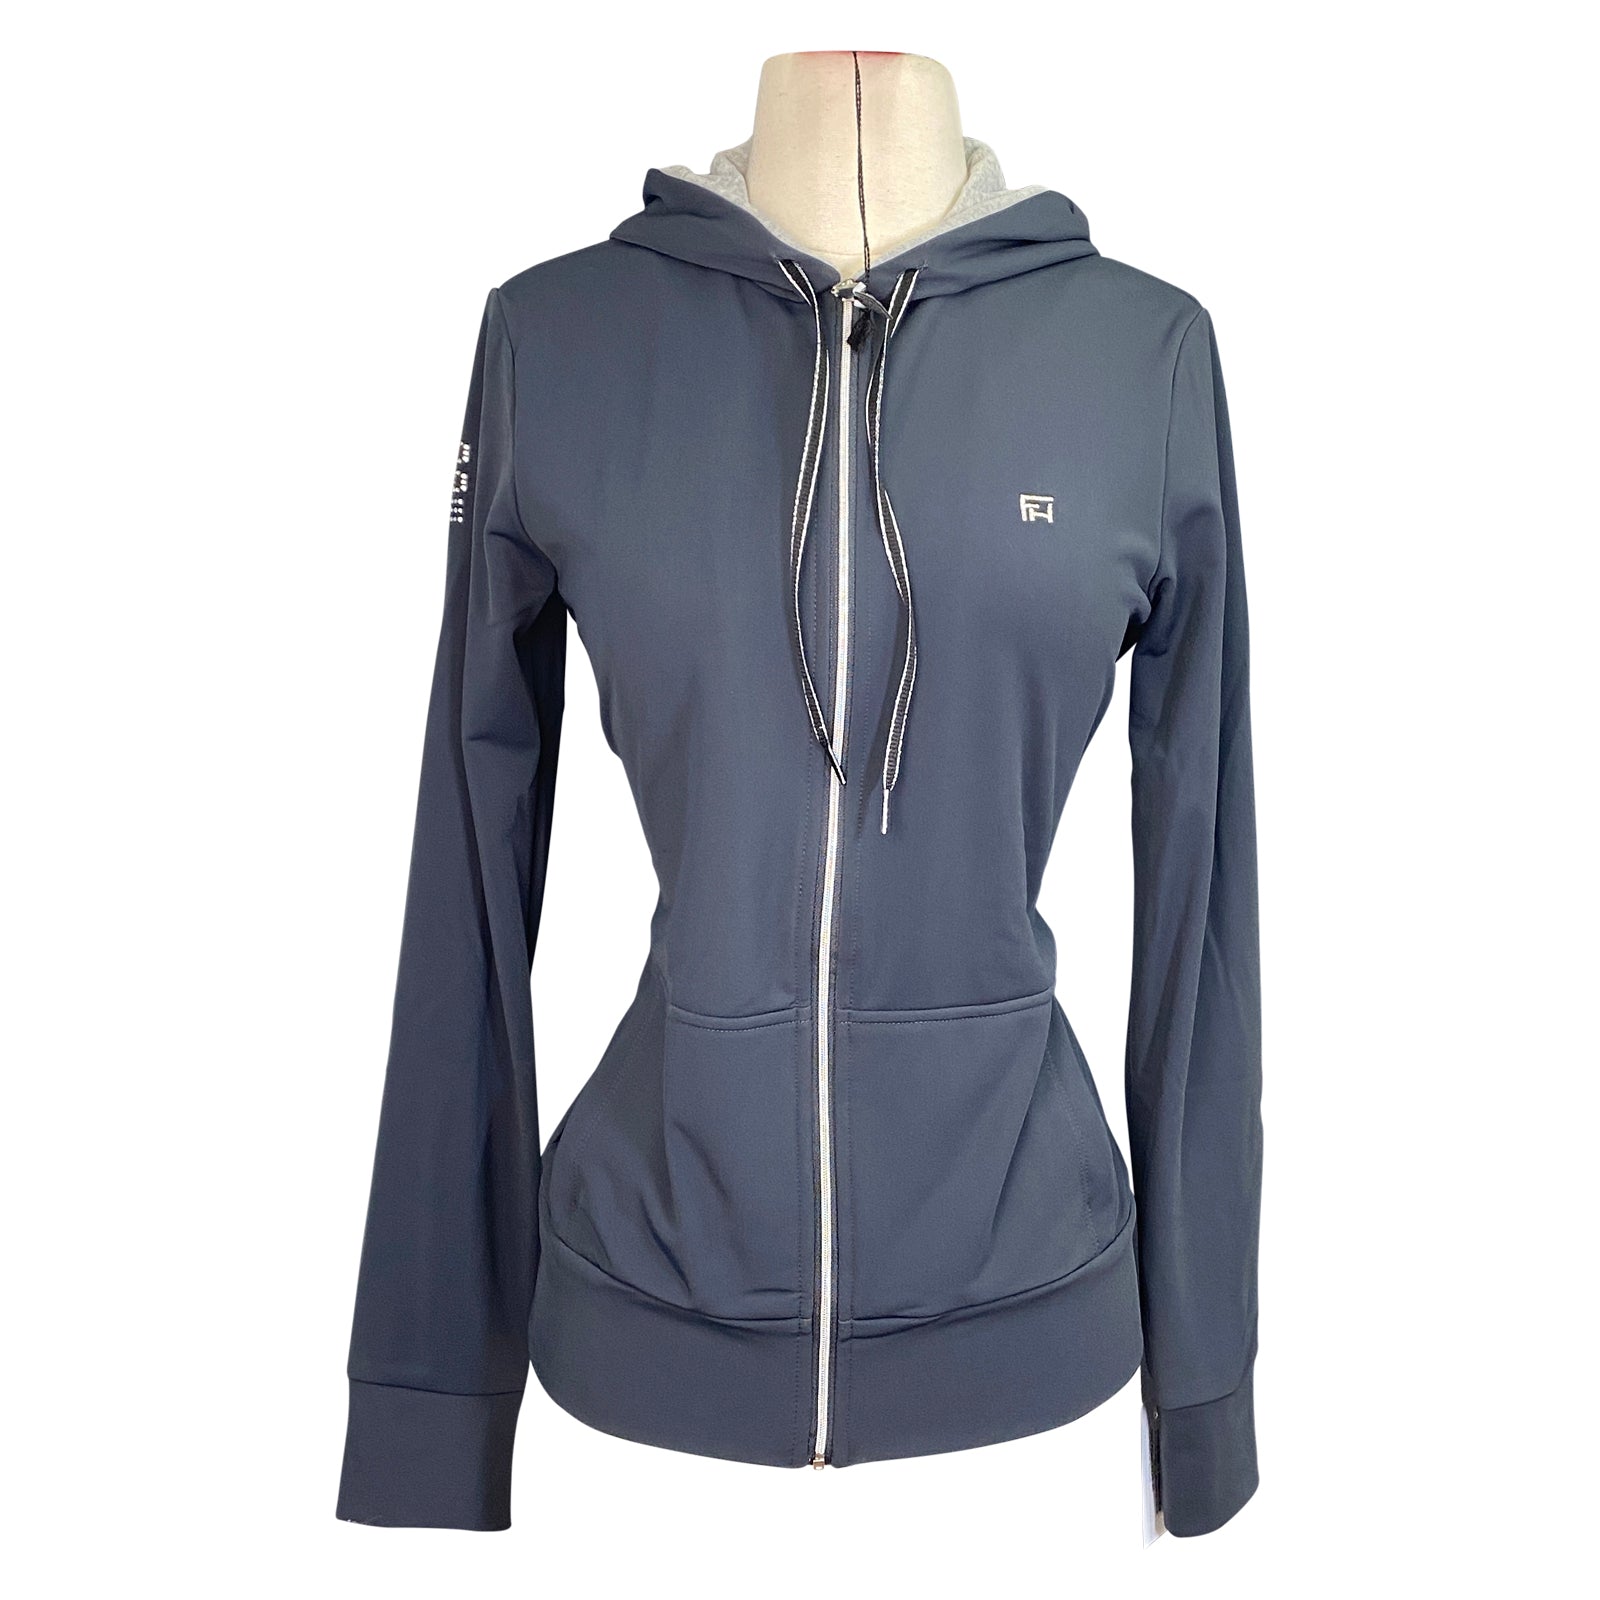 For Horses 'Maggy' Softshell Jacket in Grey